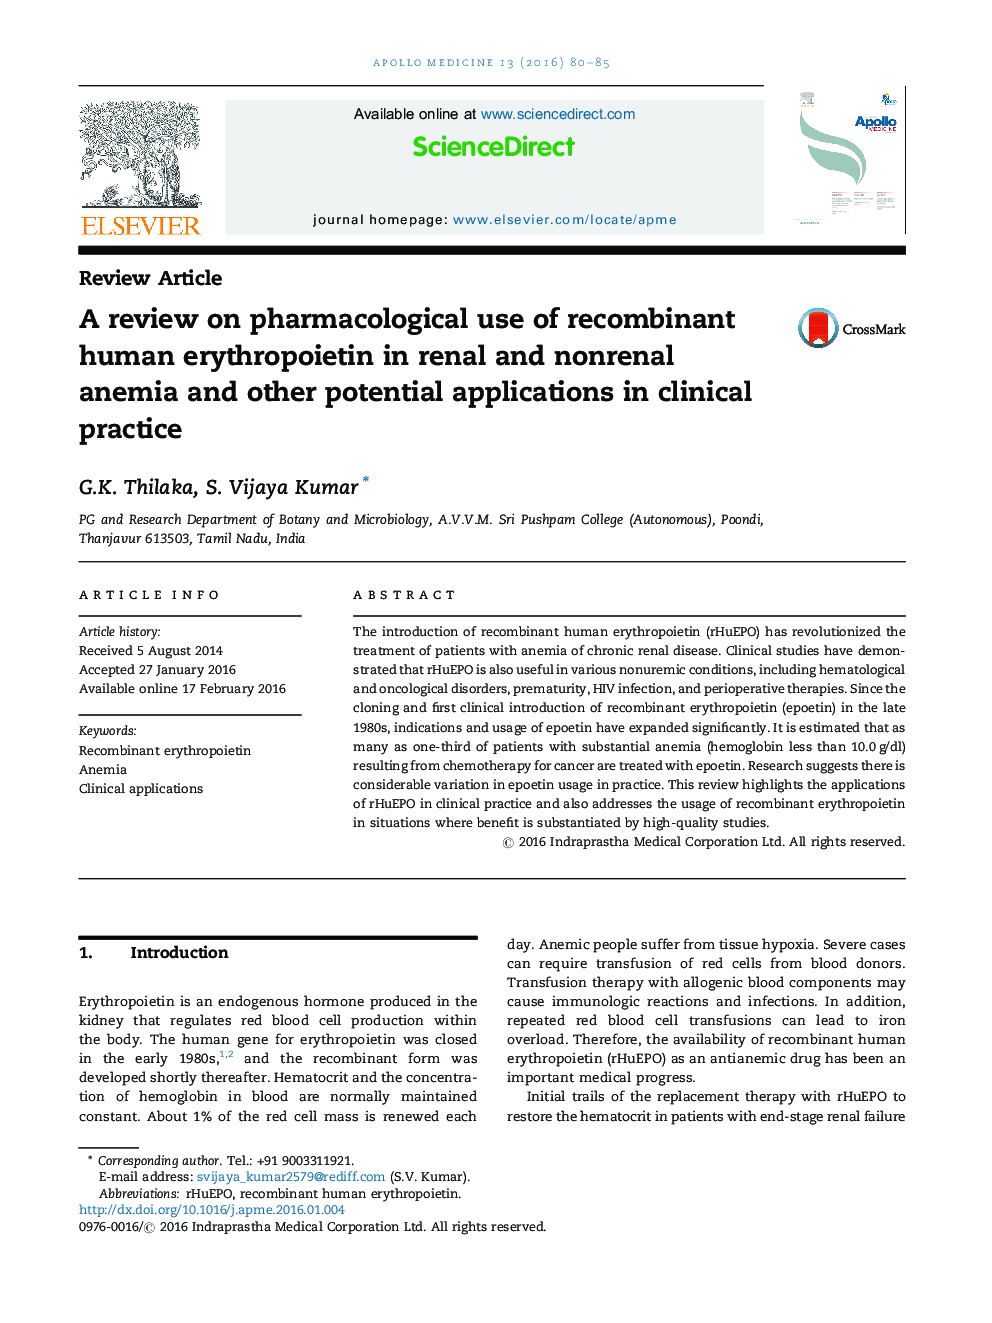 A review on pharmacological use of recombinant human erythropoietin in renal and nonrenal anemia and other potential applications in clinical practice